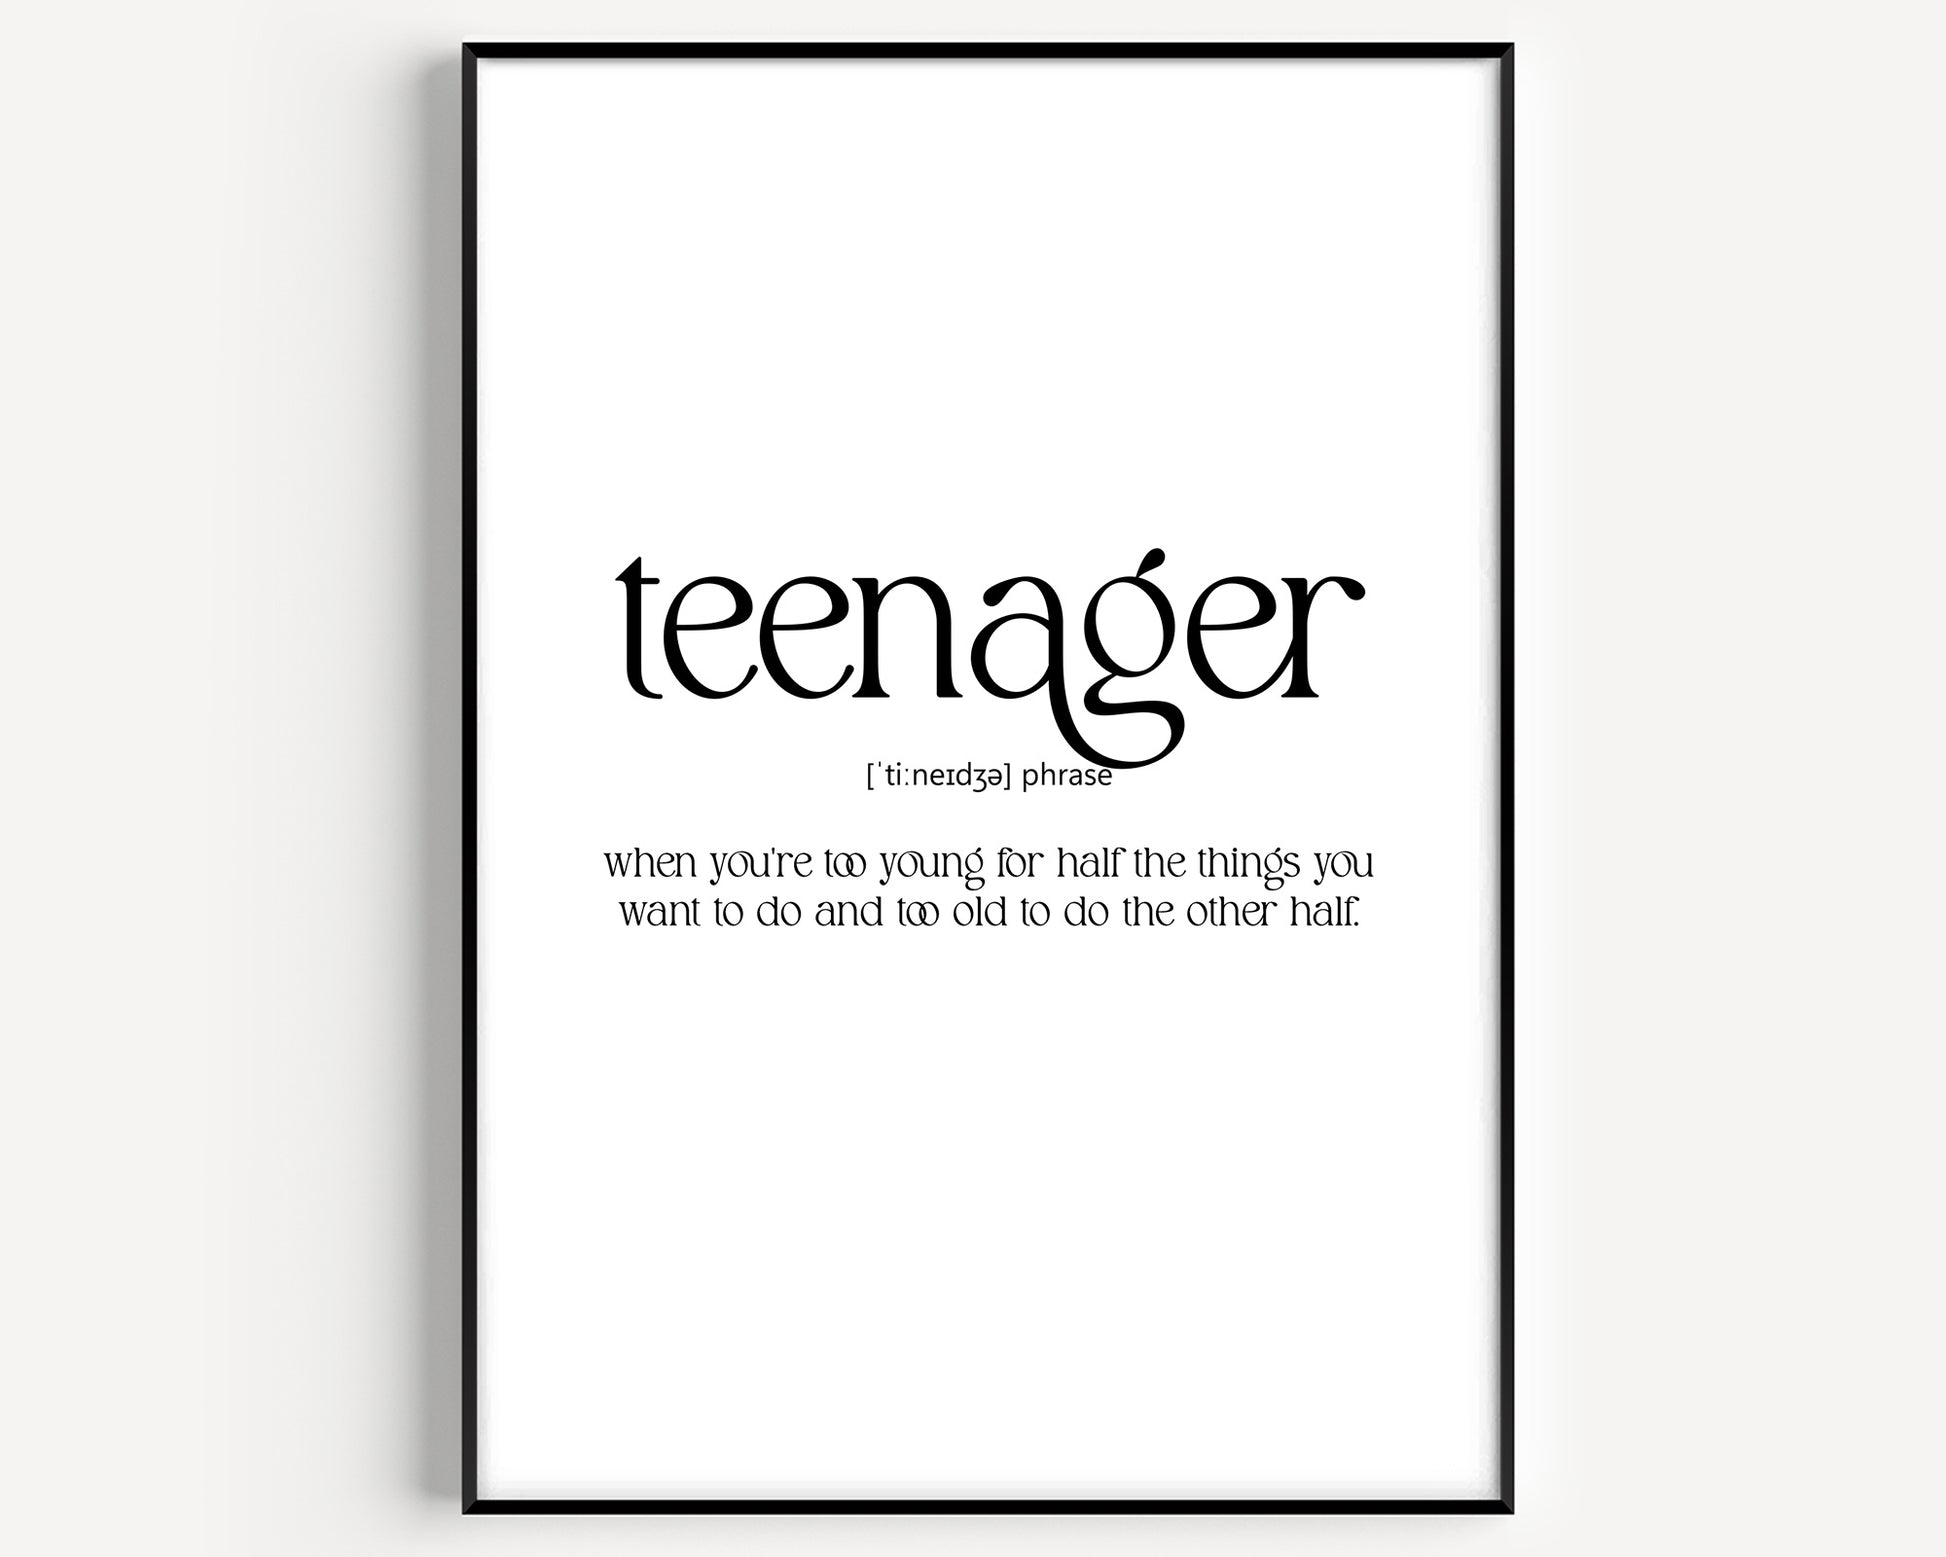 Teenager Definition Print - Magic Posters